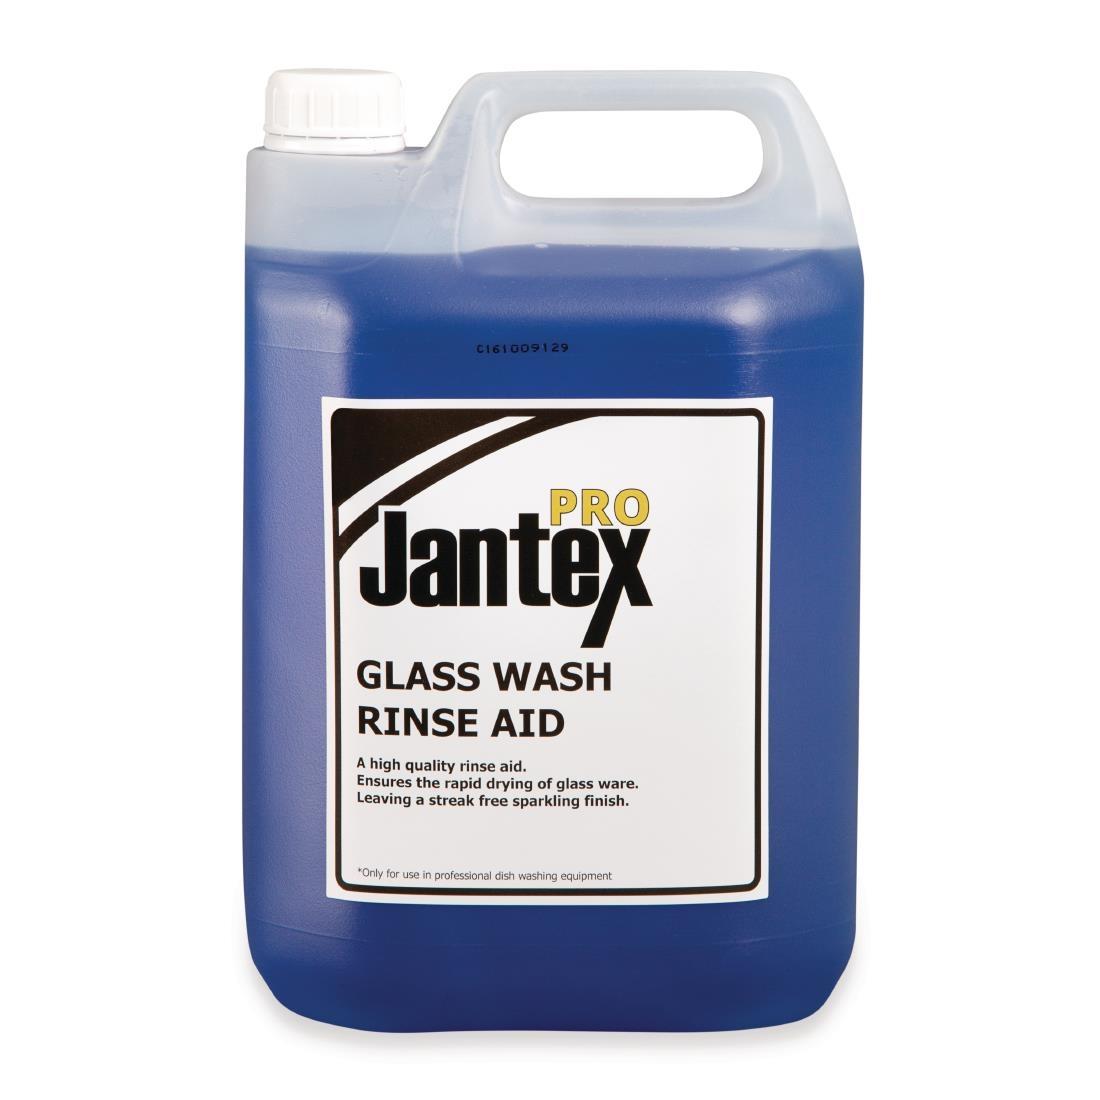 Jantex Pro Glasswasher Rinse Aid Concentrate 5Ltr - GM984  - 1